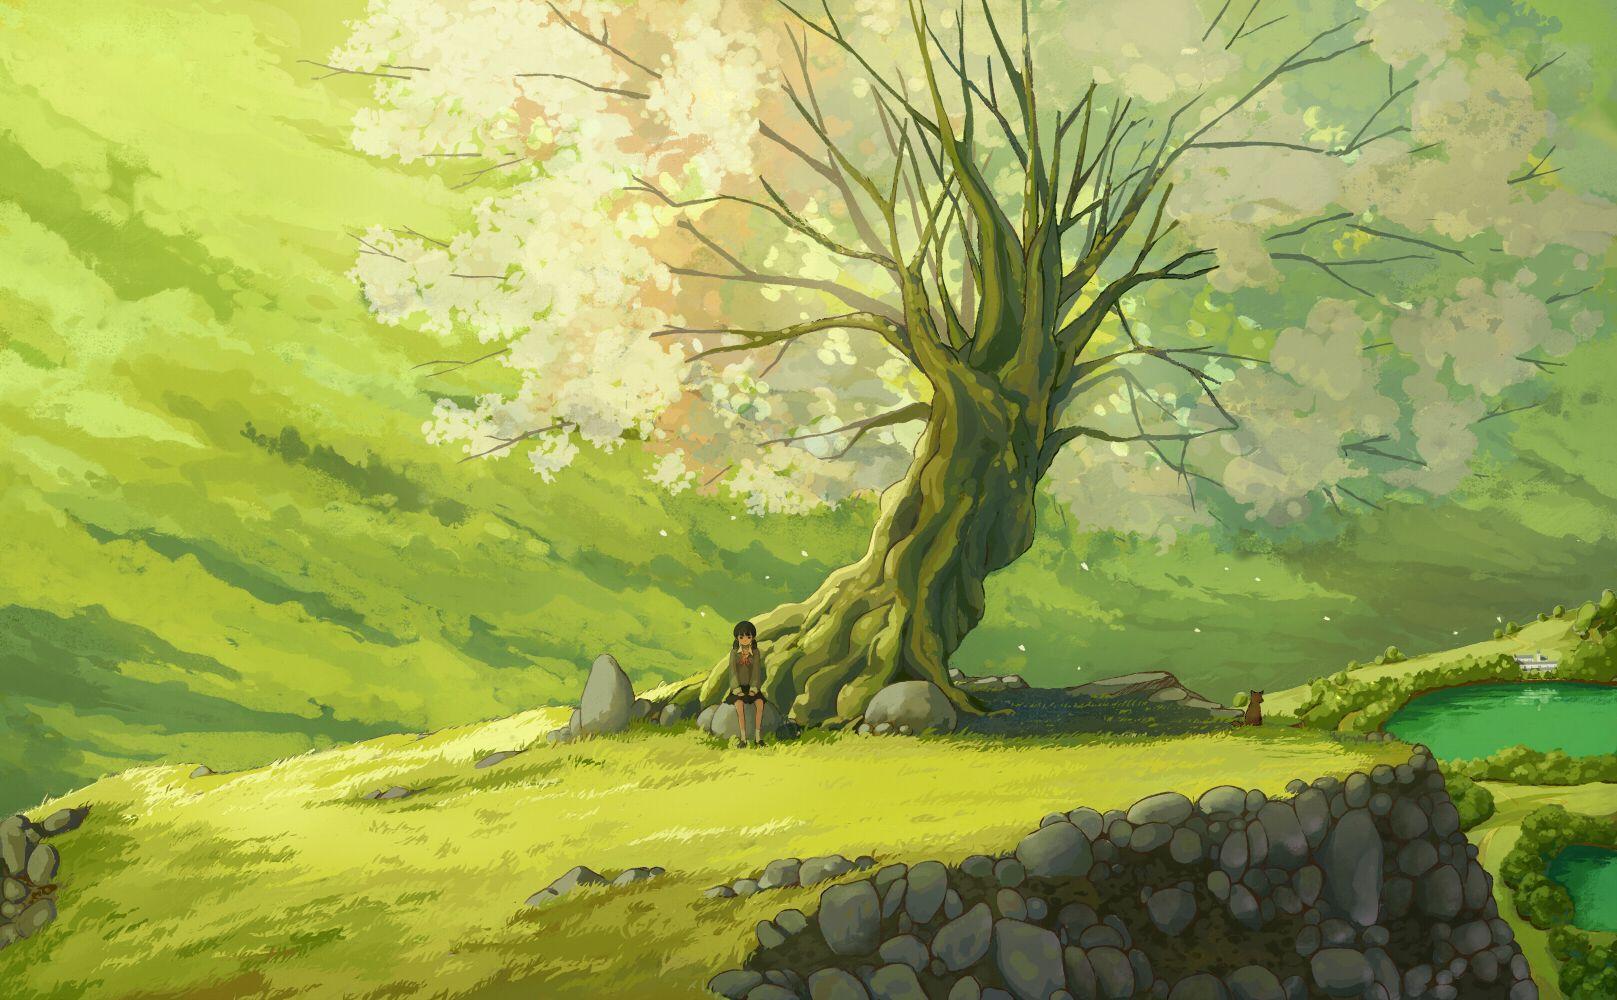  Anime Field With Sky Wallpaper Background HD Download  CBEditz